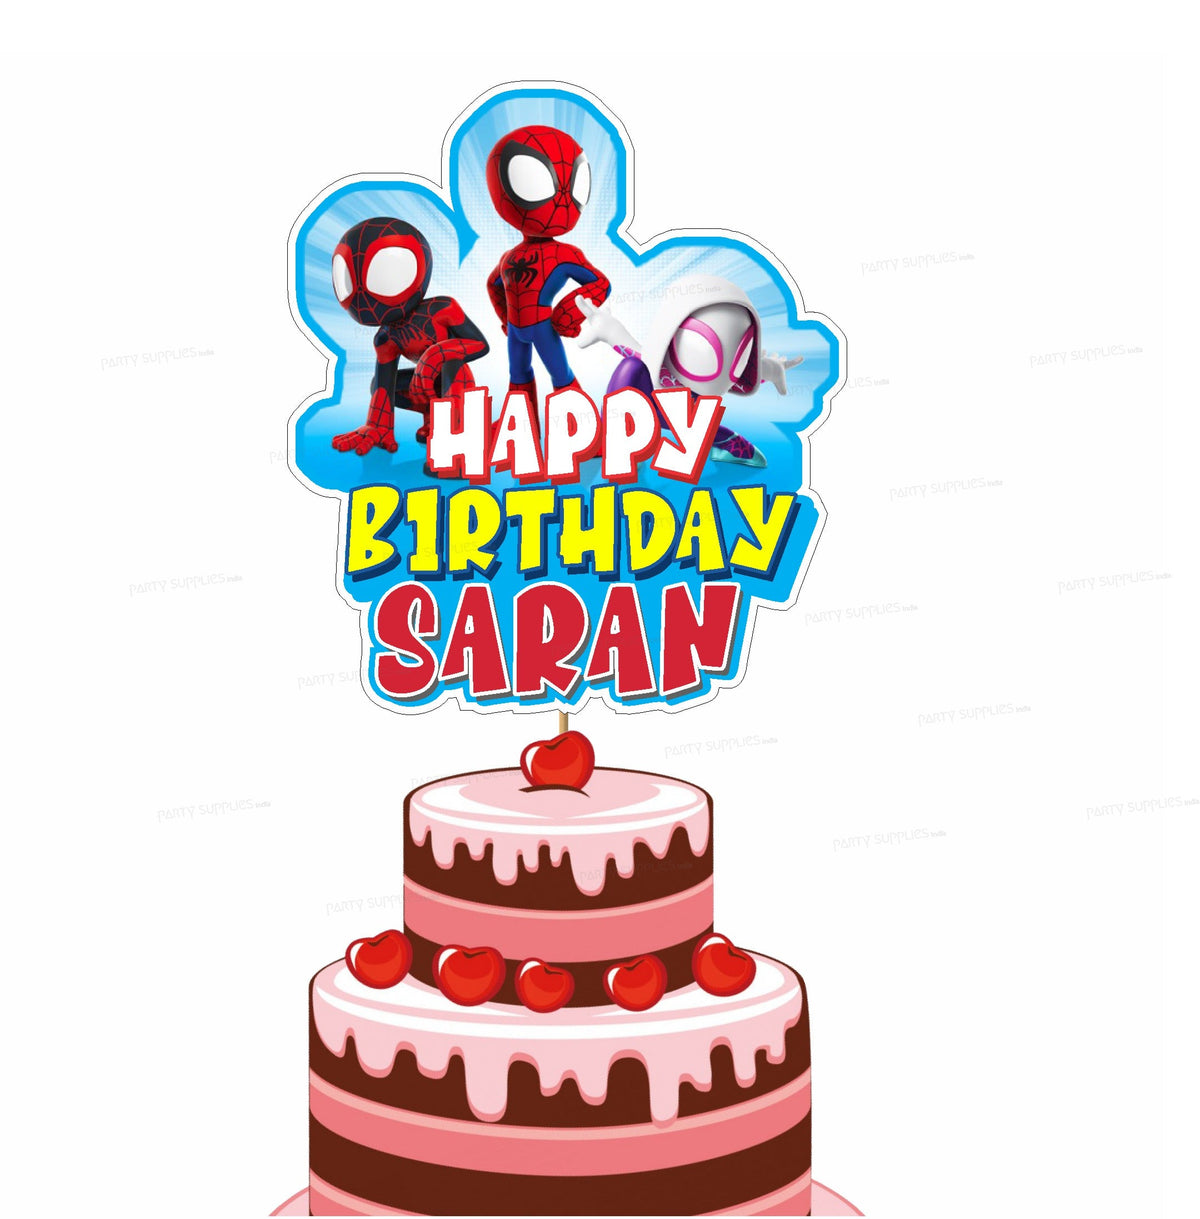 PSI Spidey and his Amazing Friends Theme Customized Cake Topper